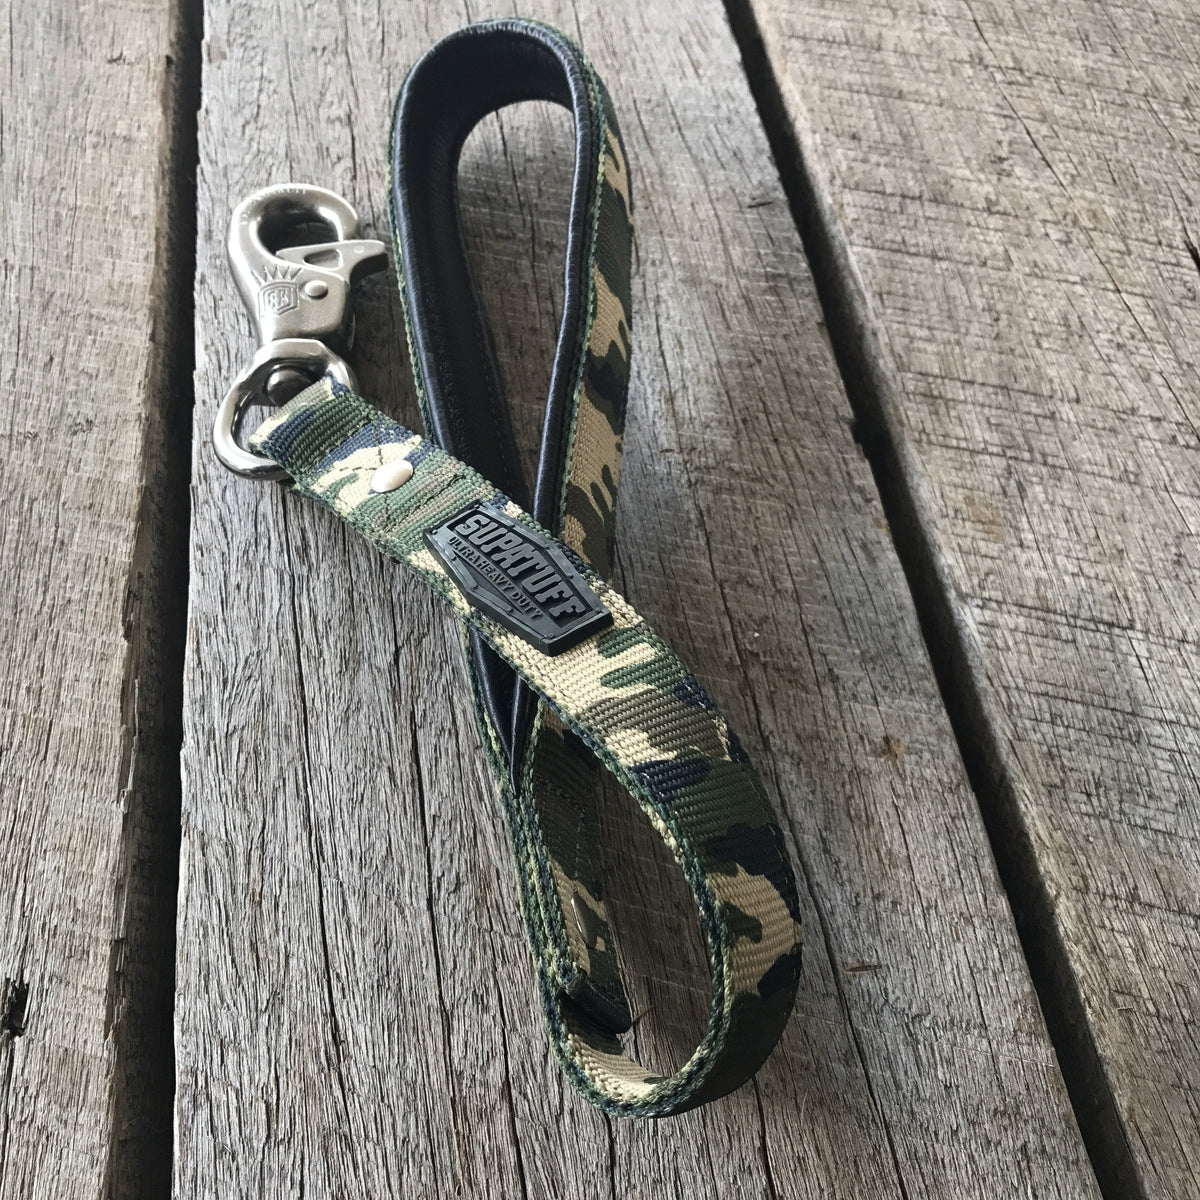 Super strong dog leash. Designed in Australia, stainless steel bullsnap with camo webbing.